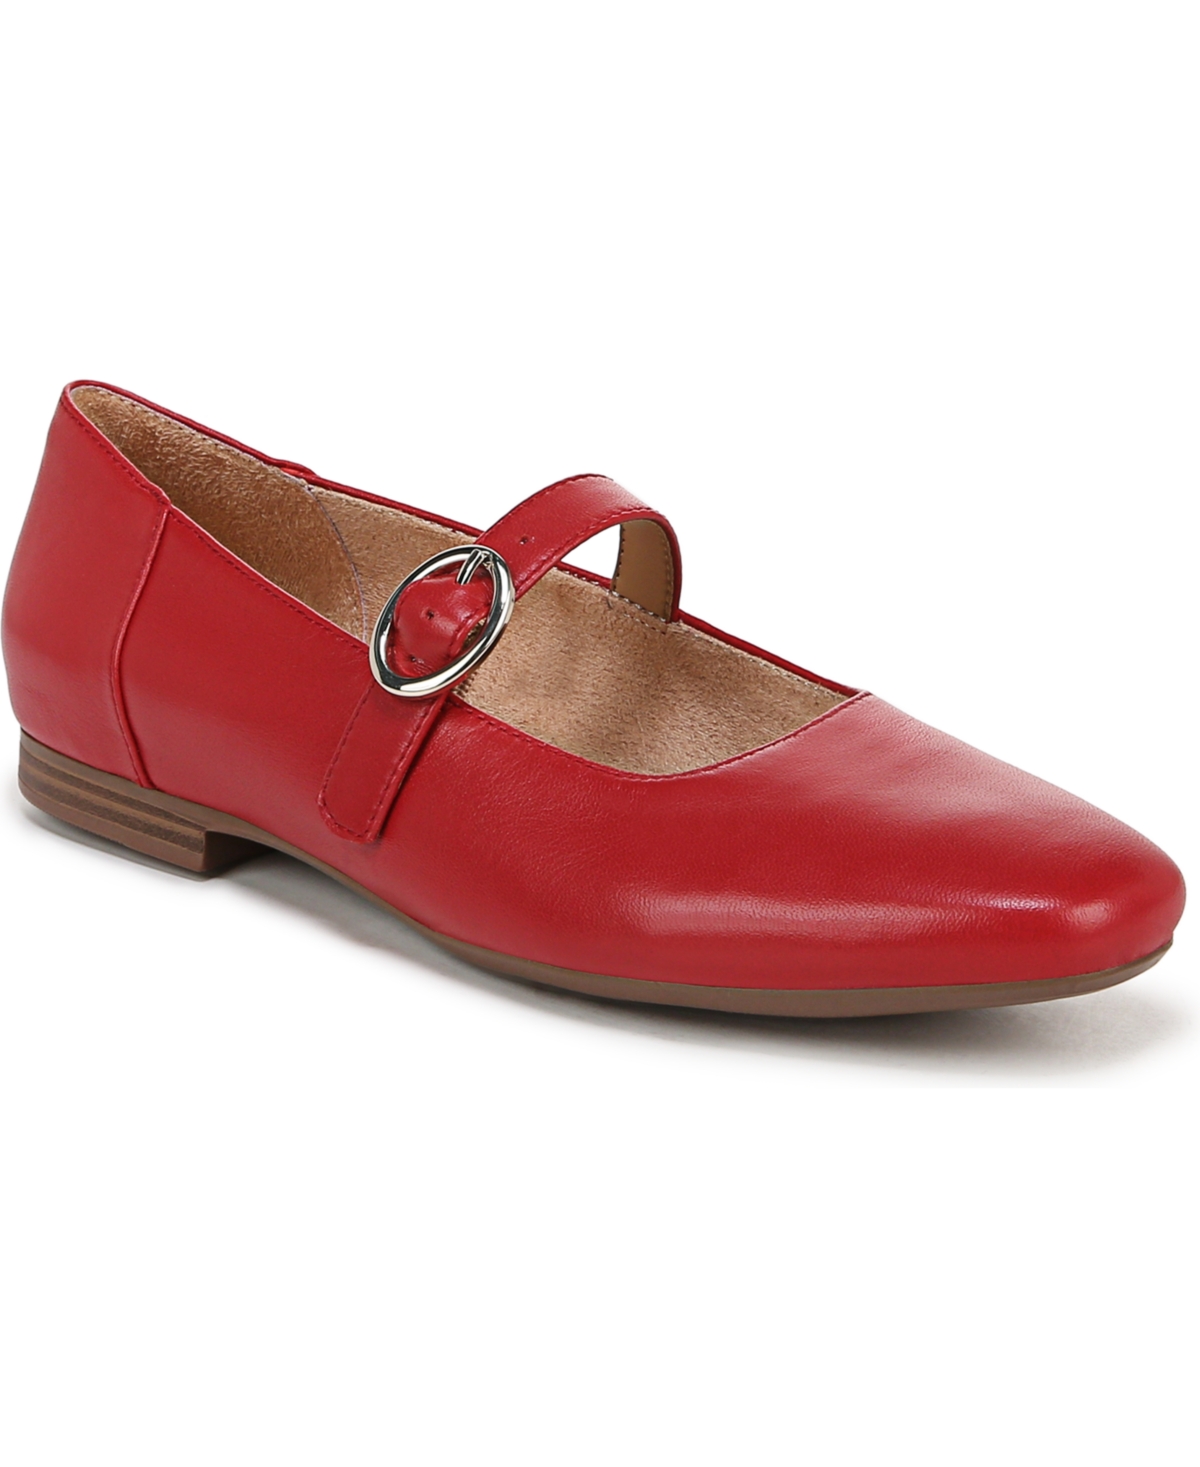 Naturalizer Kelly Mary-jane Flats In Crimson Red Leather